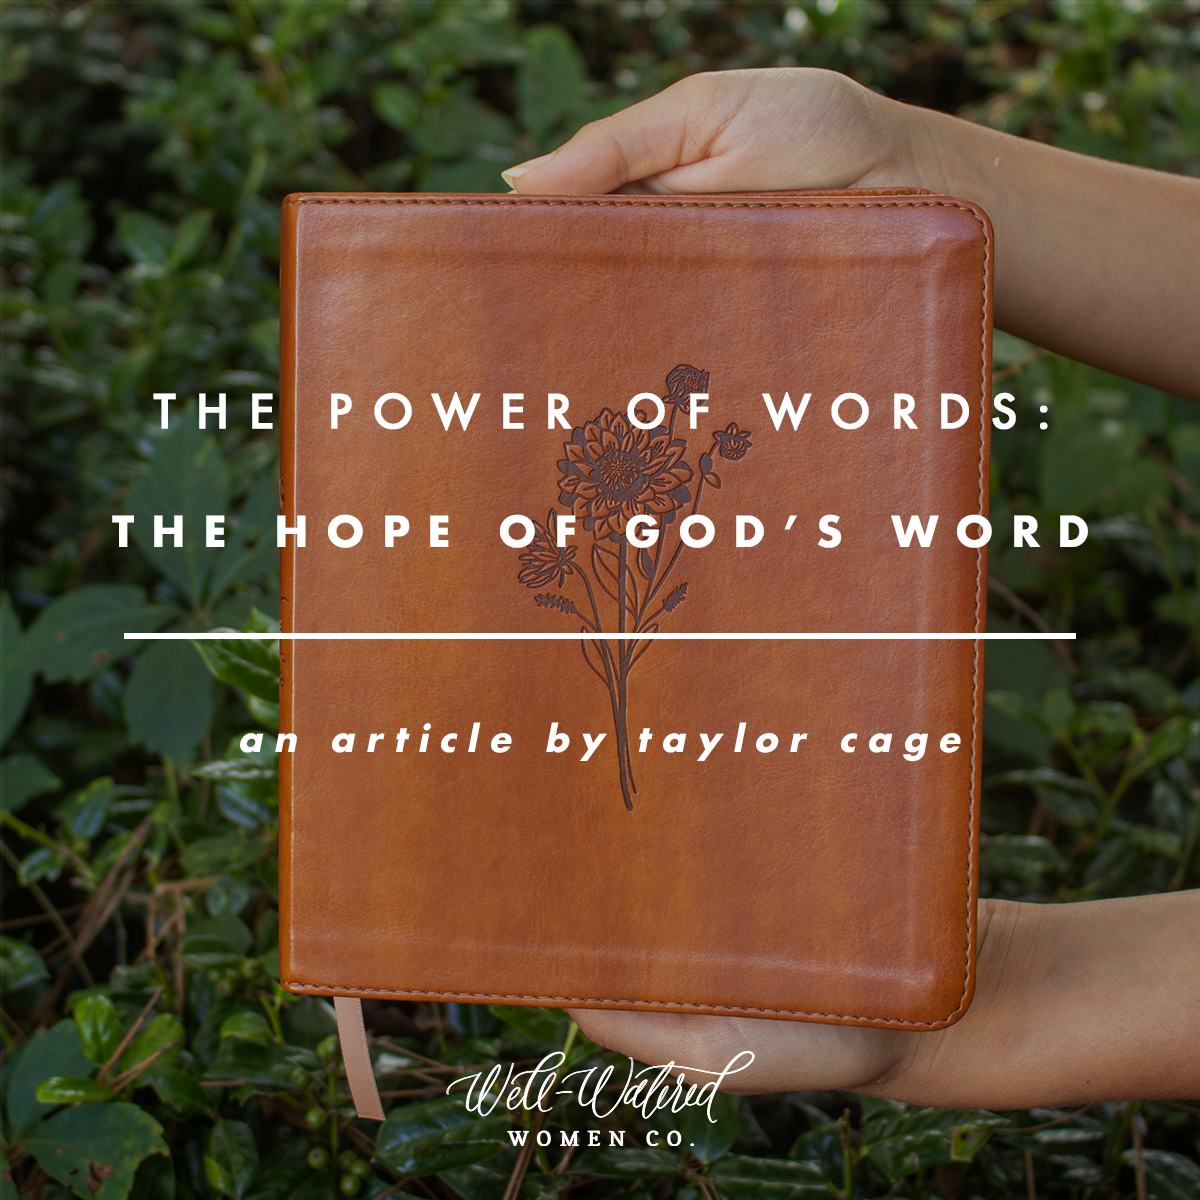 The Hope of God's Word | Well-Watered Women Articles